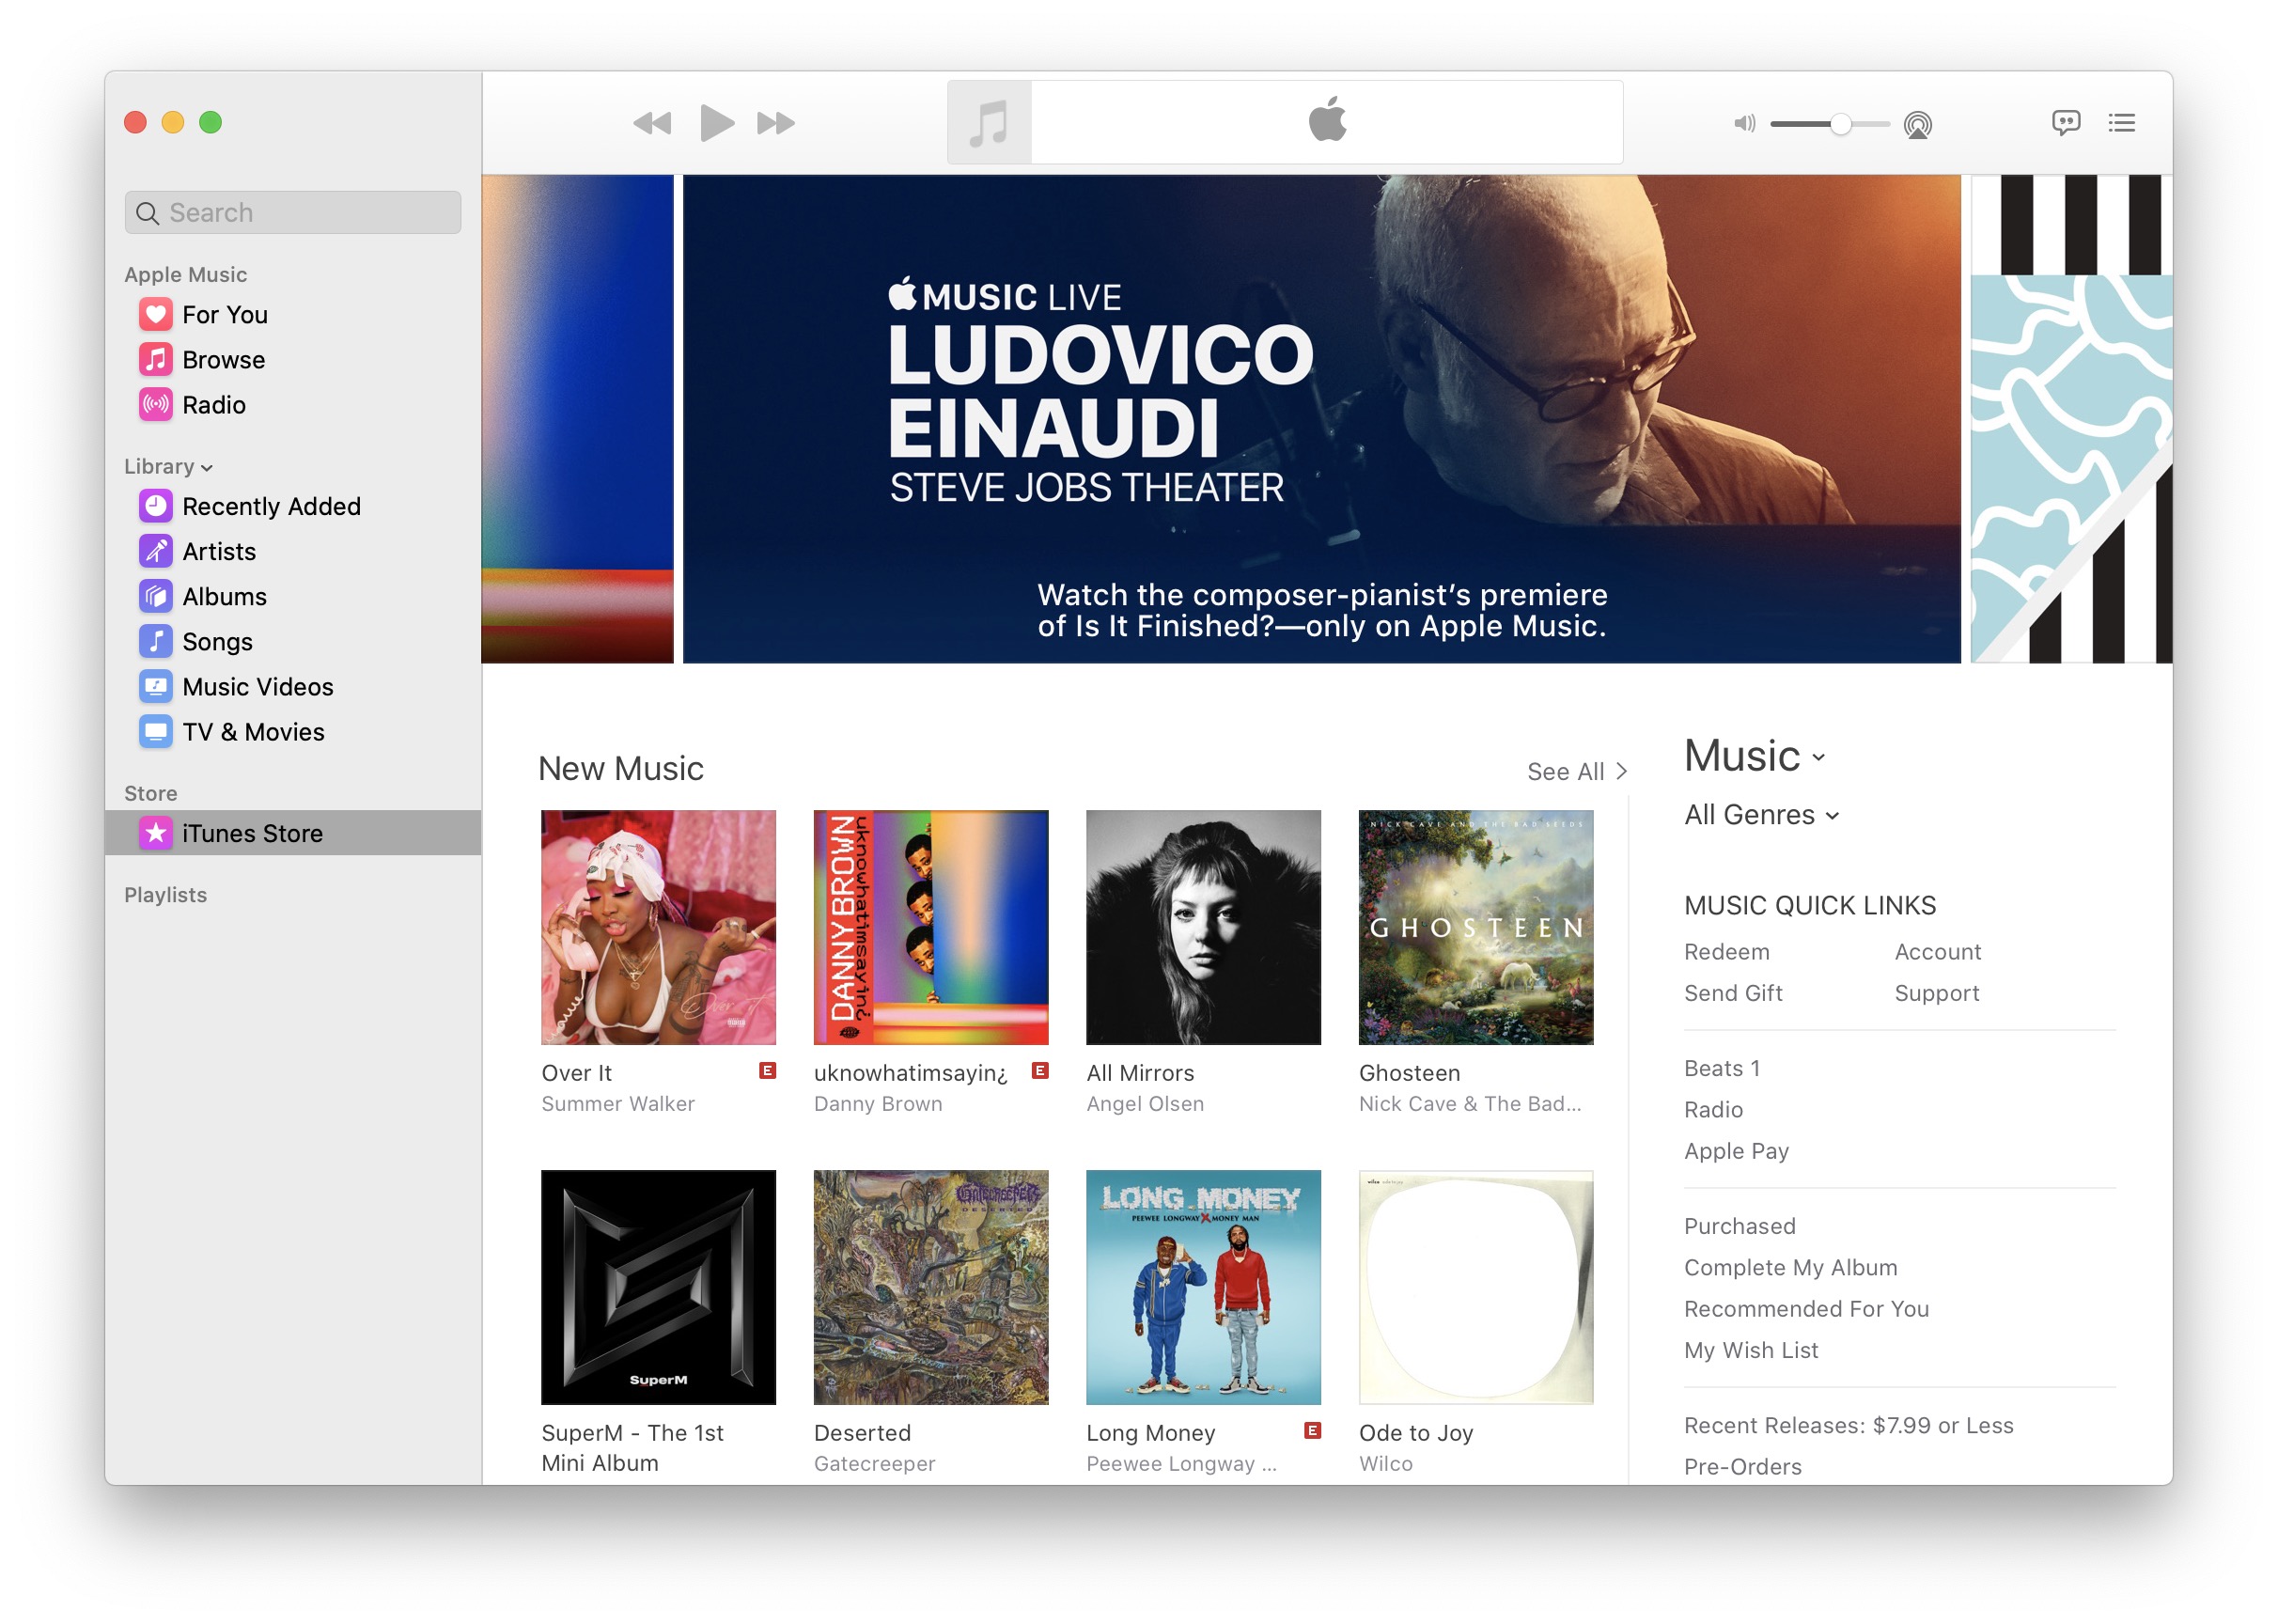 How to manage media files in Apple's Music, TV, Podcasts, and Books apps  for Mac - The Mac Security Blog